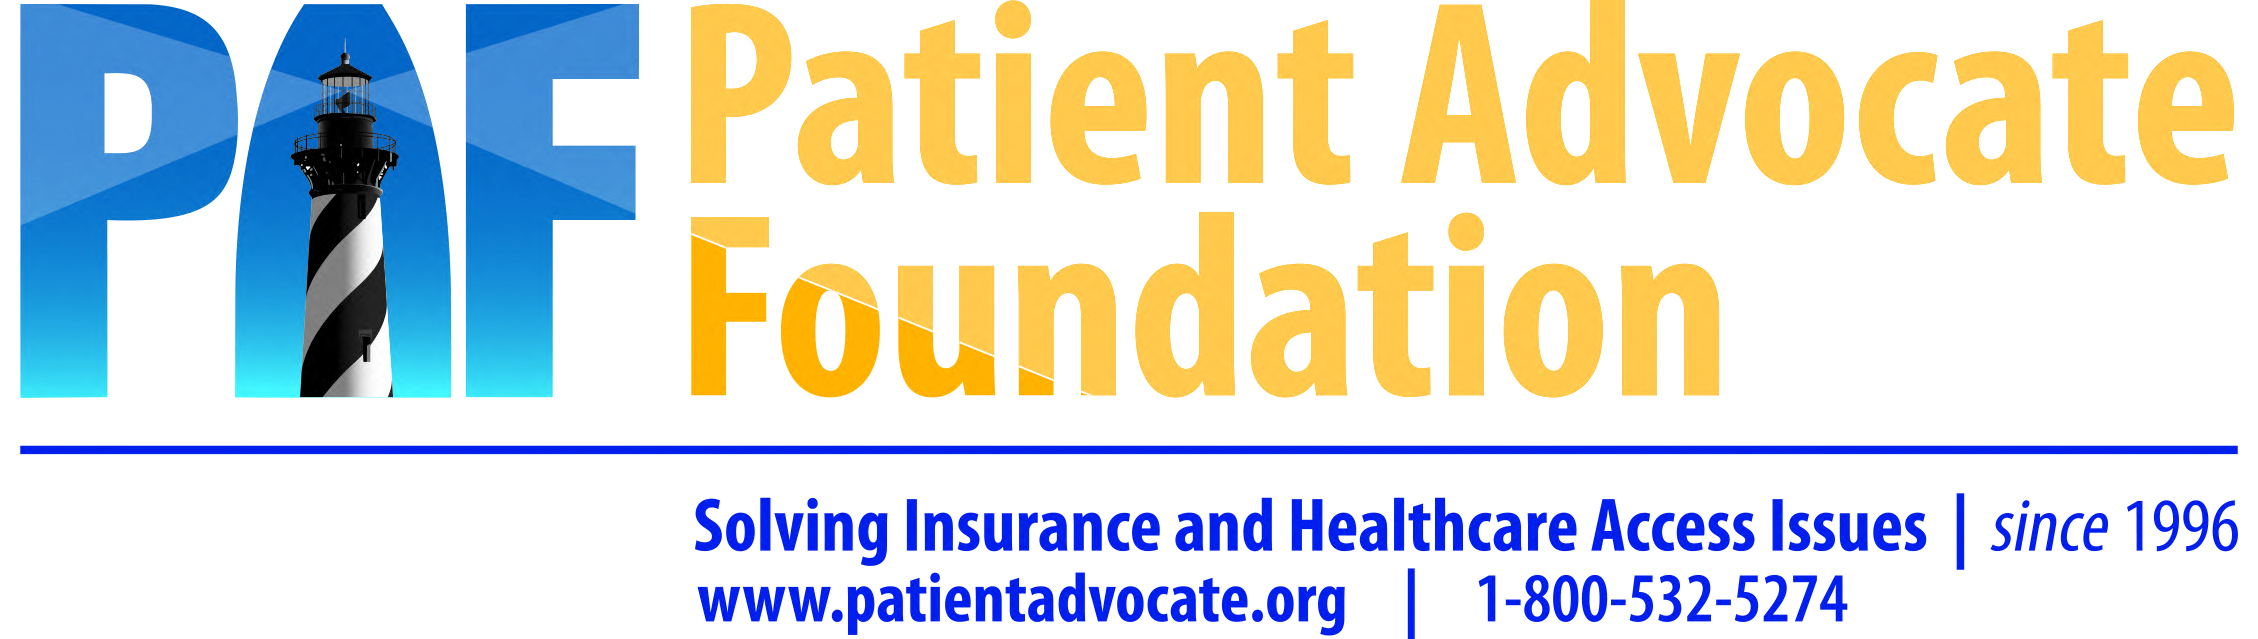 Image of - Patient Advocate Foundation